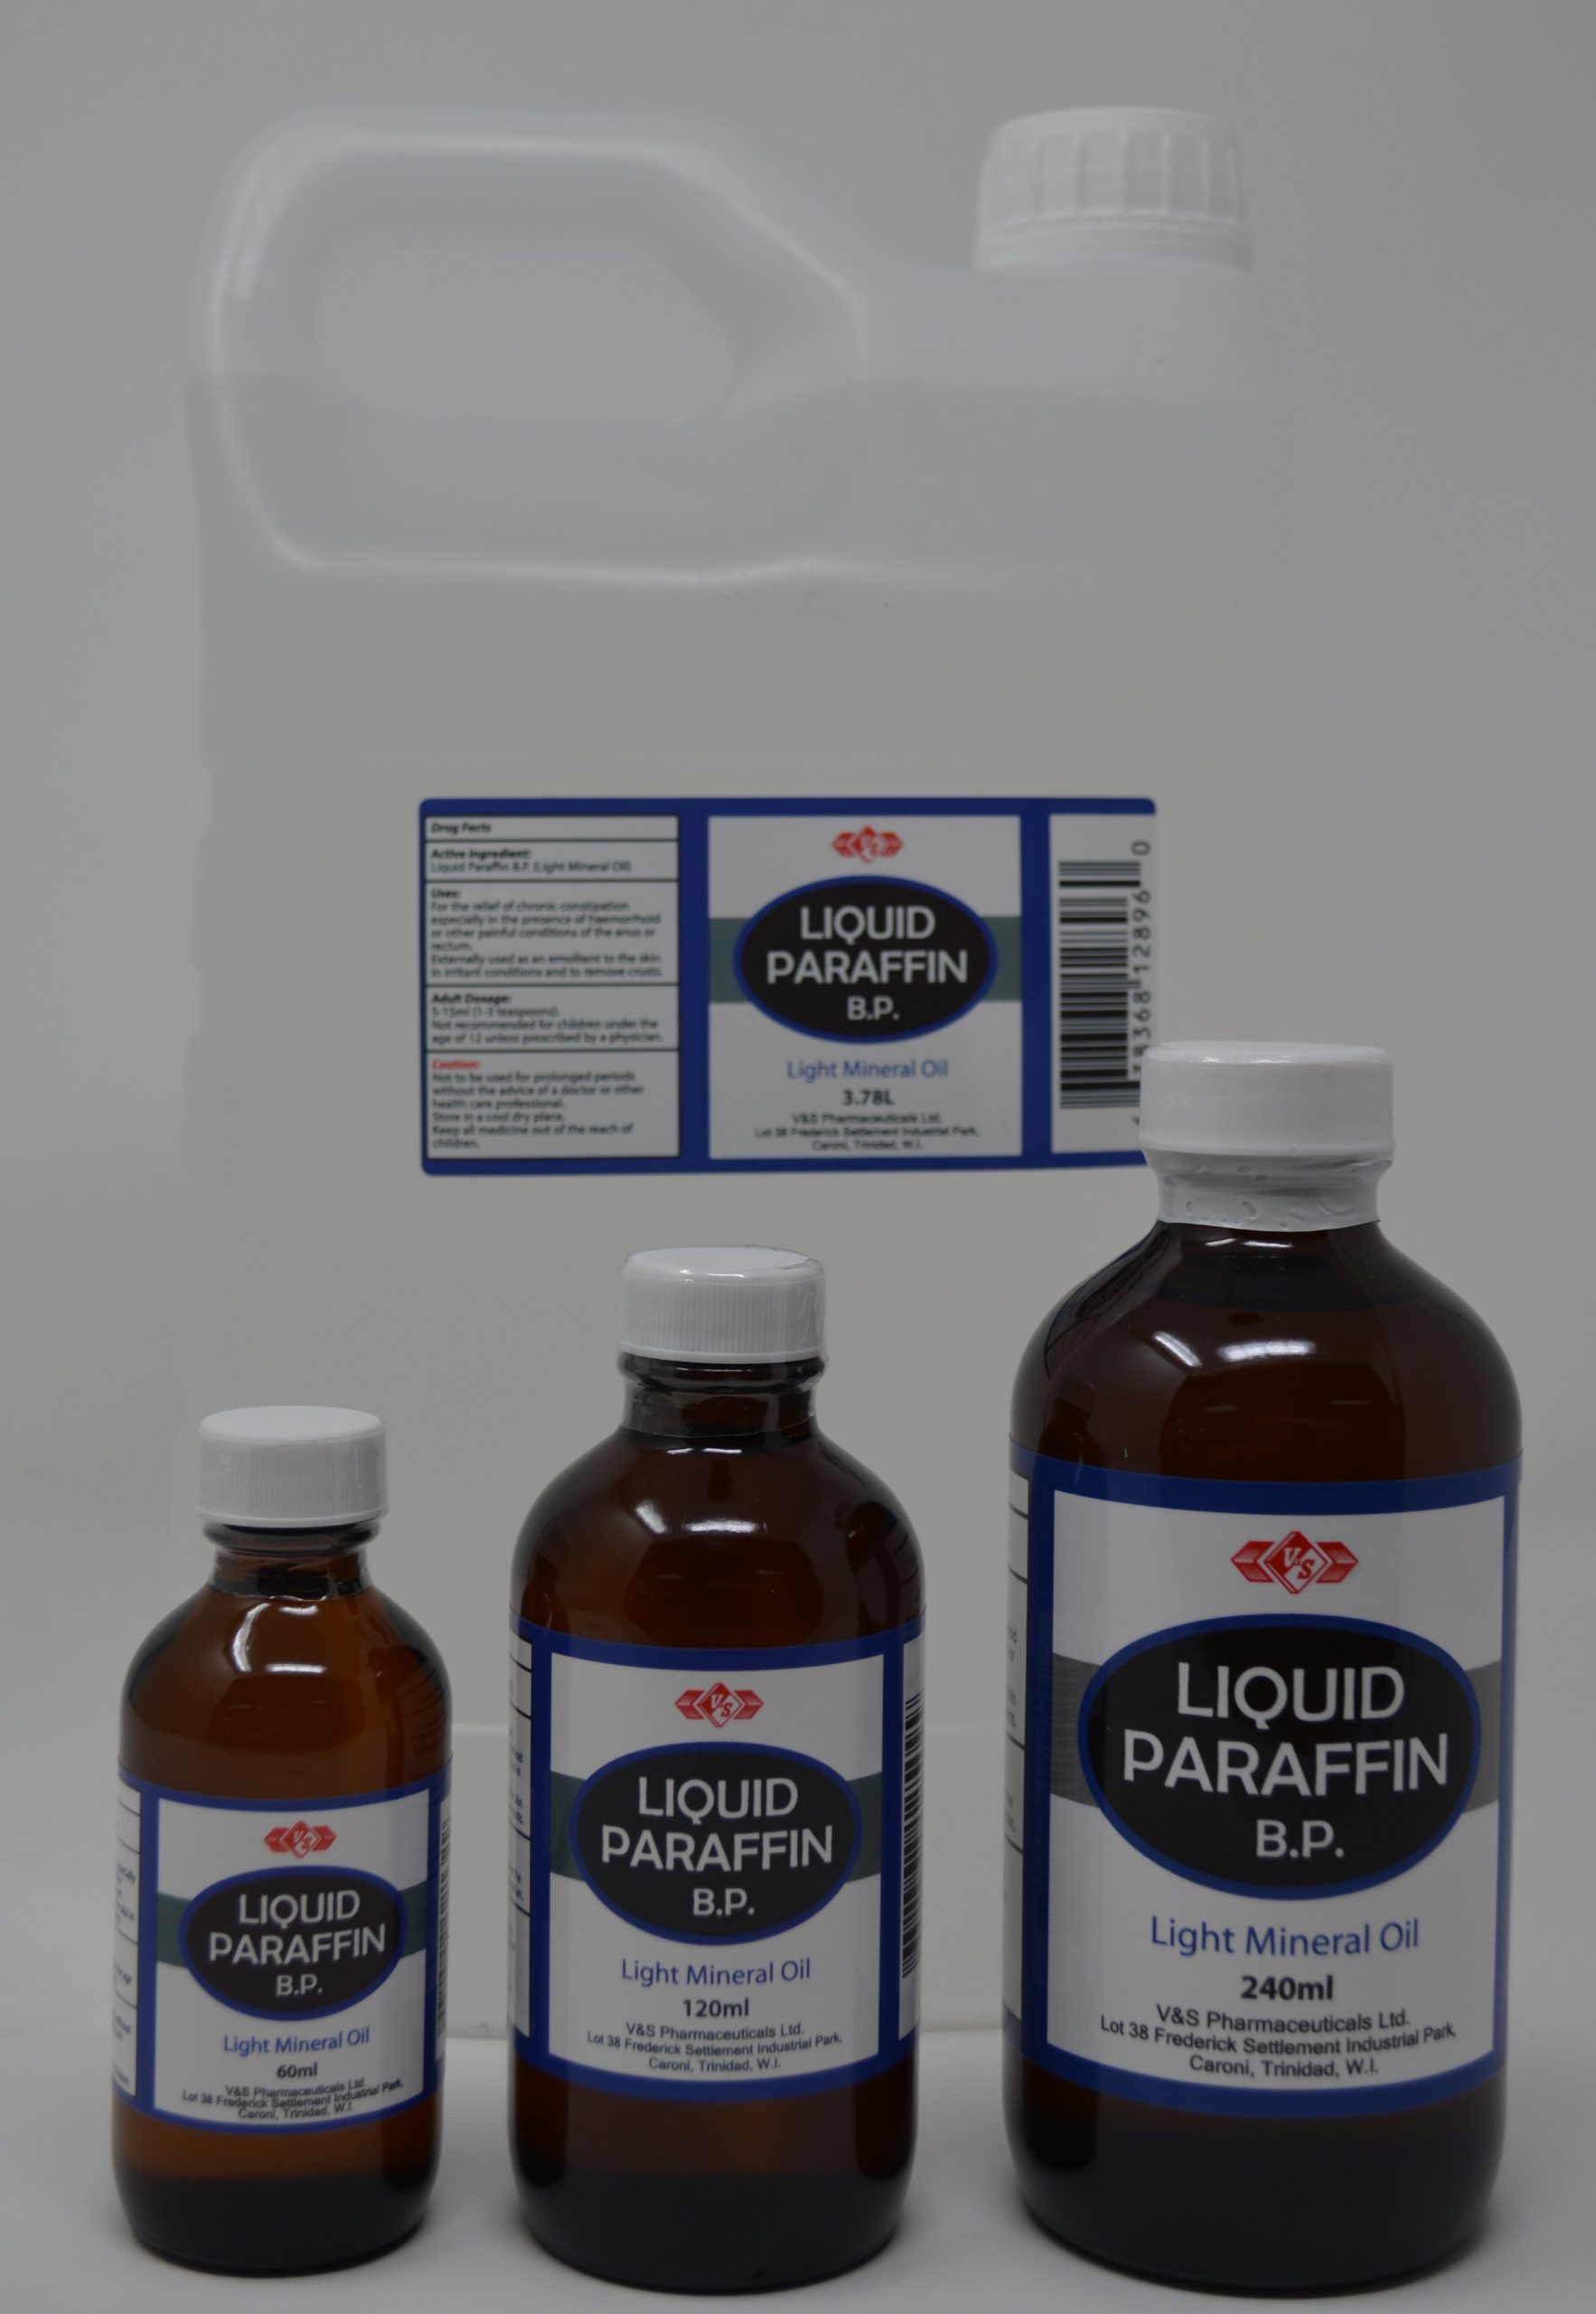 Liquid Paraffin Oil for Skin Care: Uses and Benefits